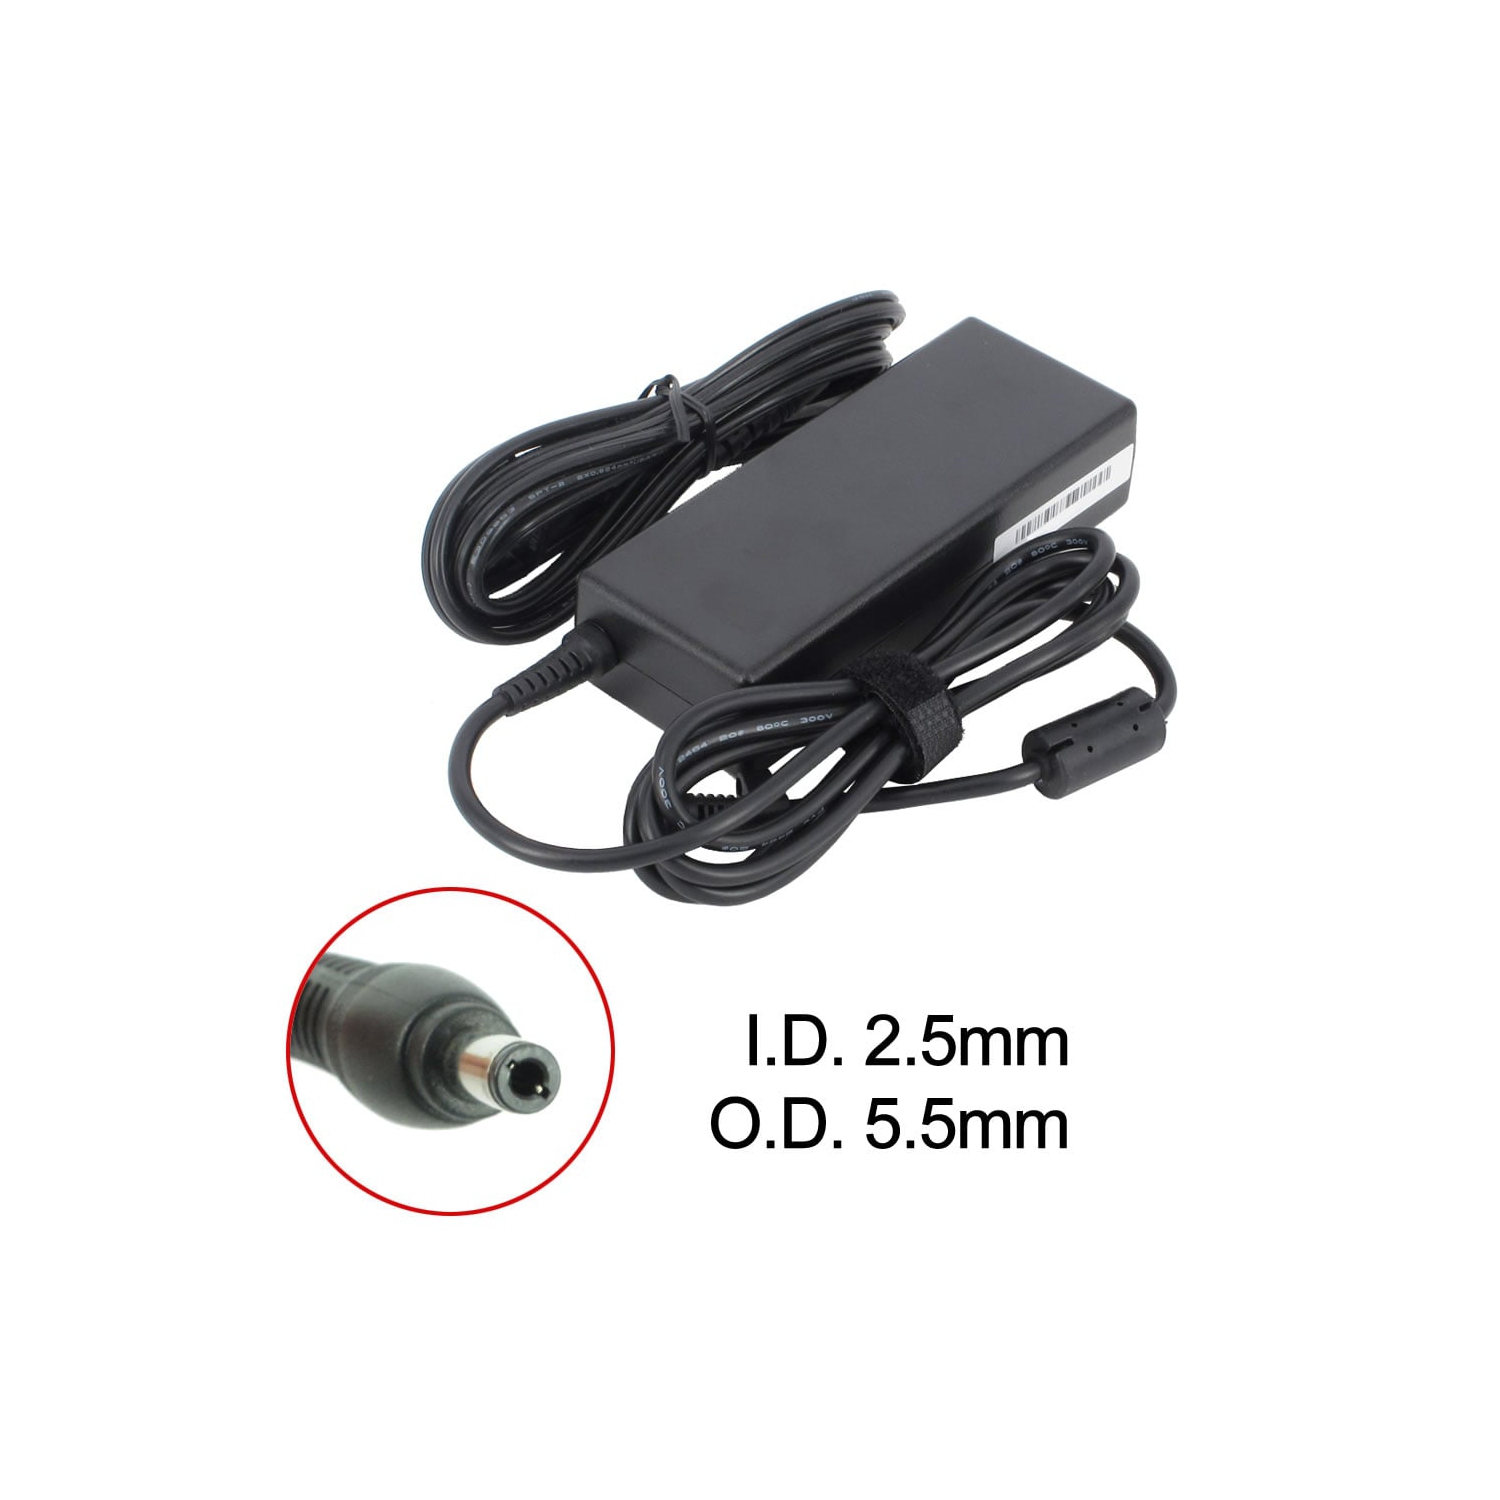 BATTDEPOT New Laptop AC Adapter for NEC LC700J/54DR 103942 808-875692-010A 9T458 ADP-65 HB BBEF PA-1900-36 SA80-3115